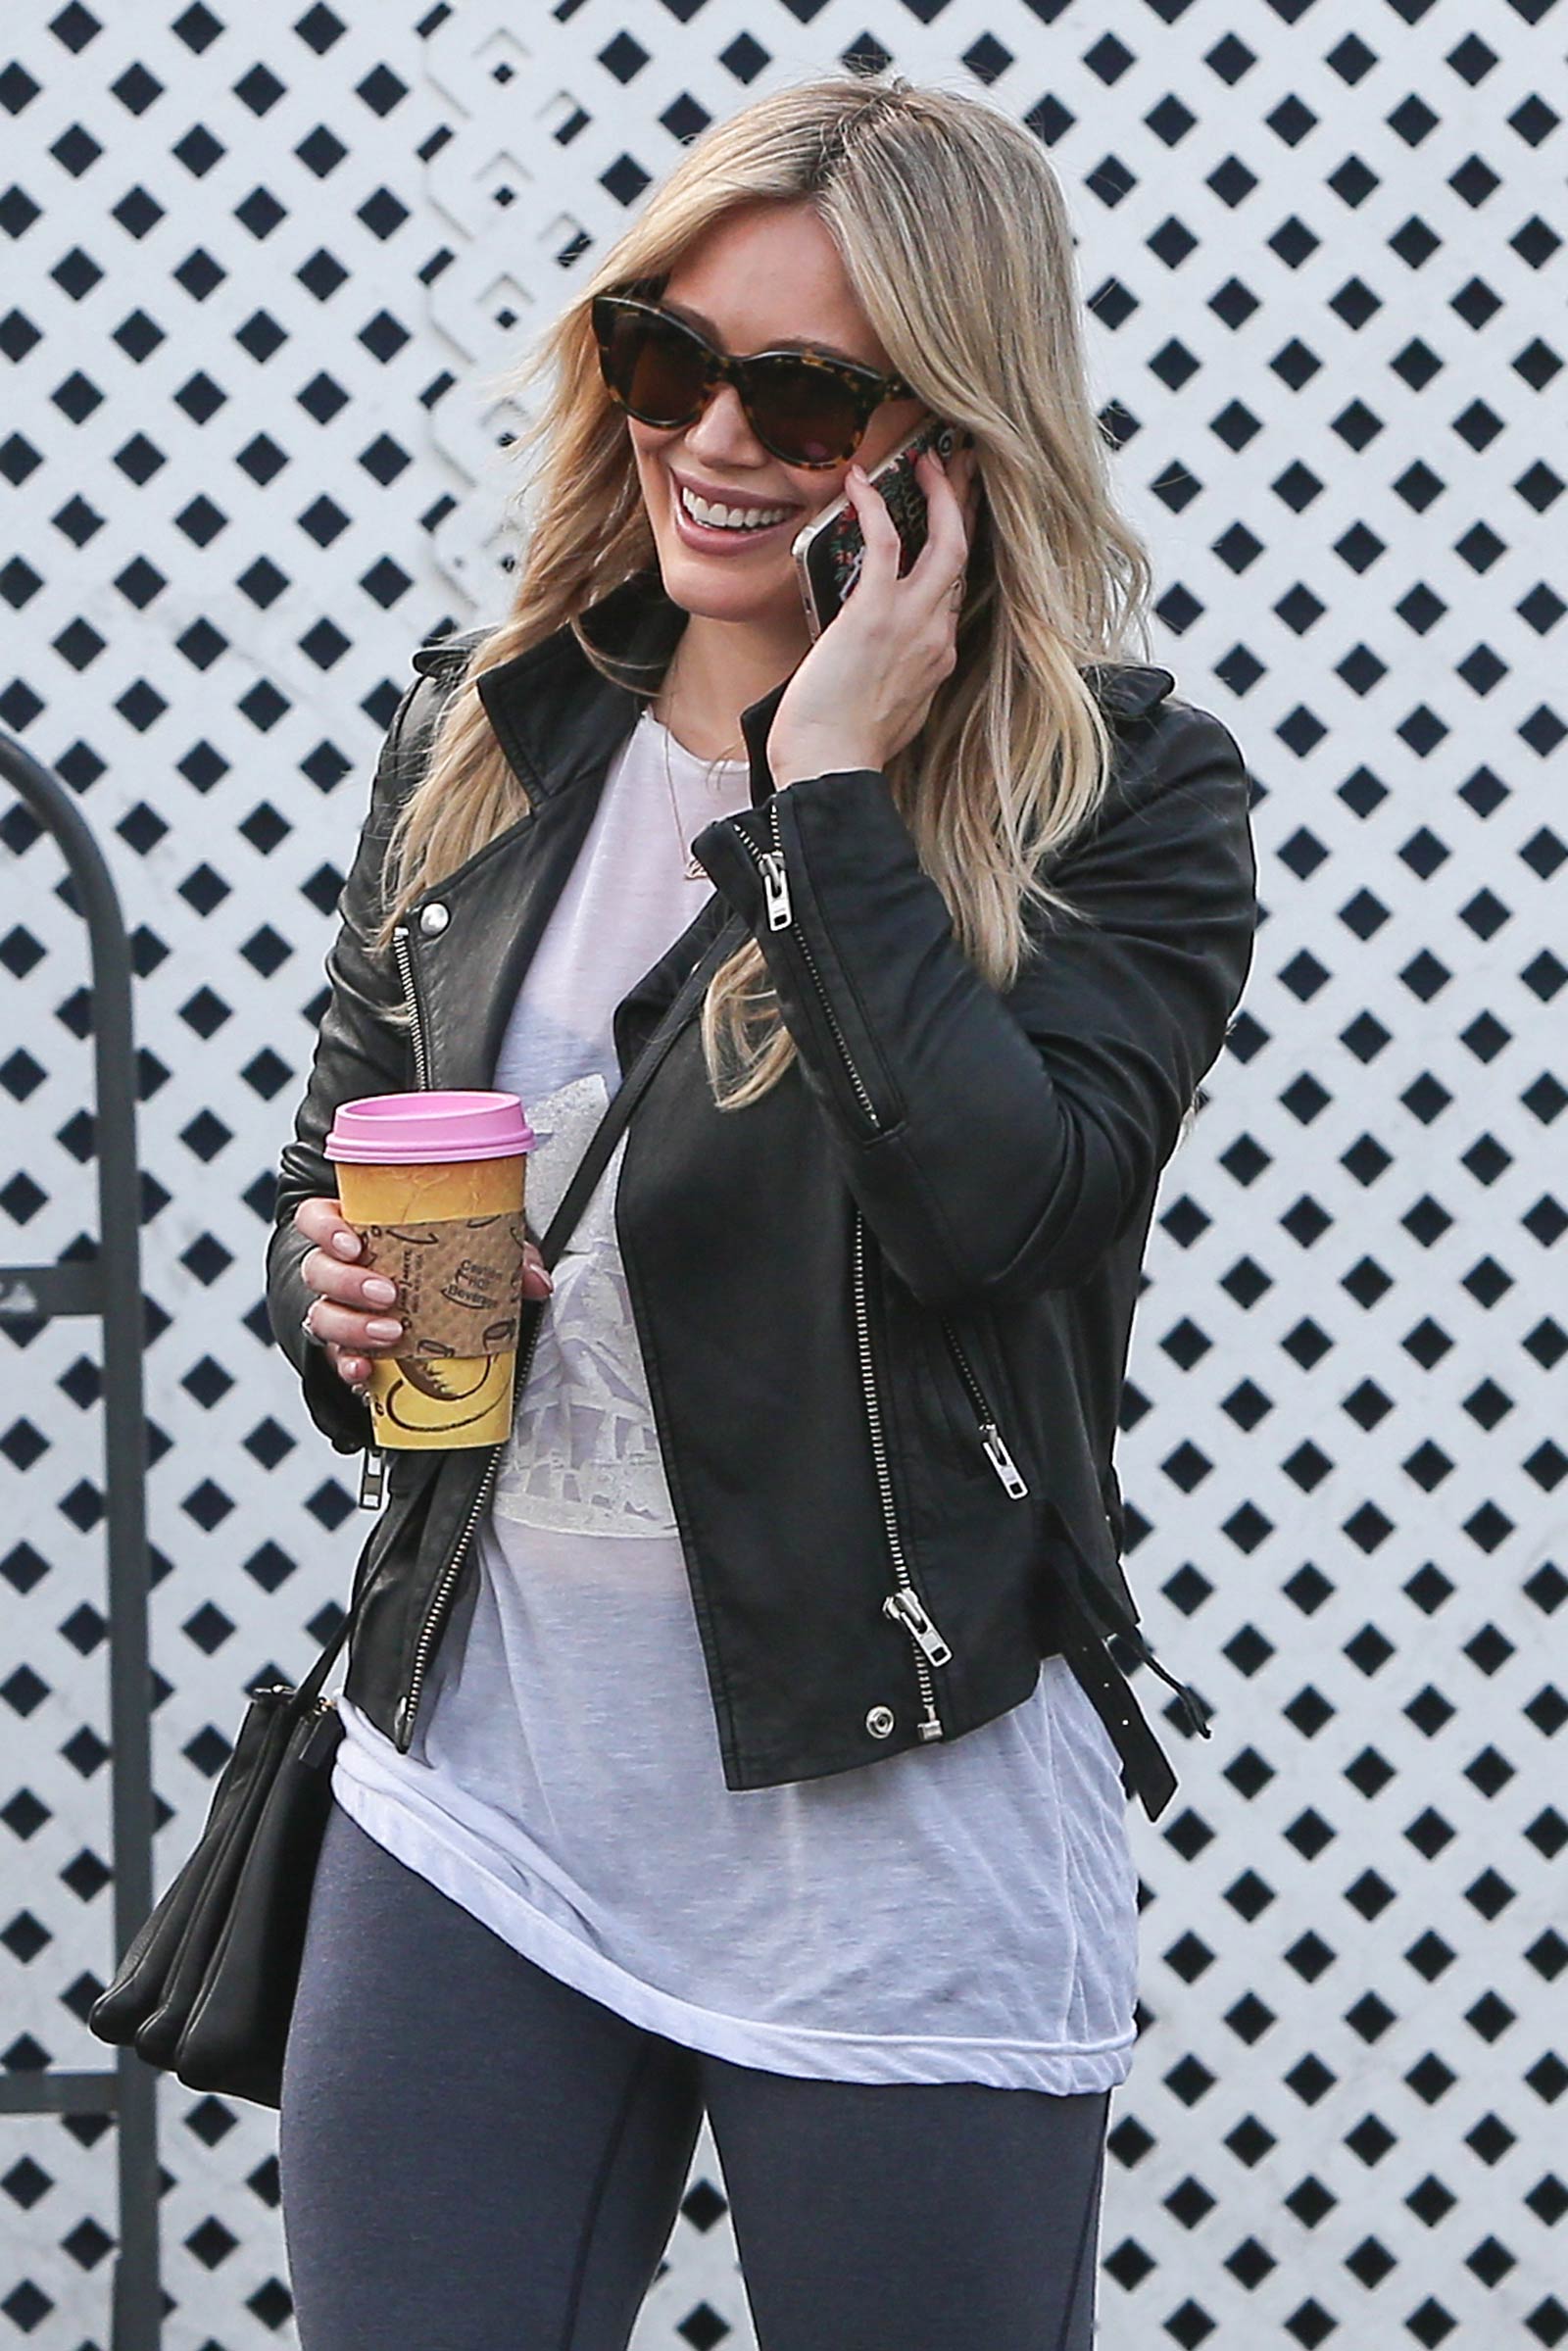 Hilary Duff out in Beverly Hills